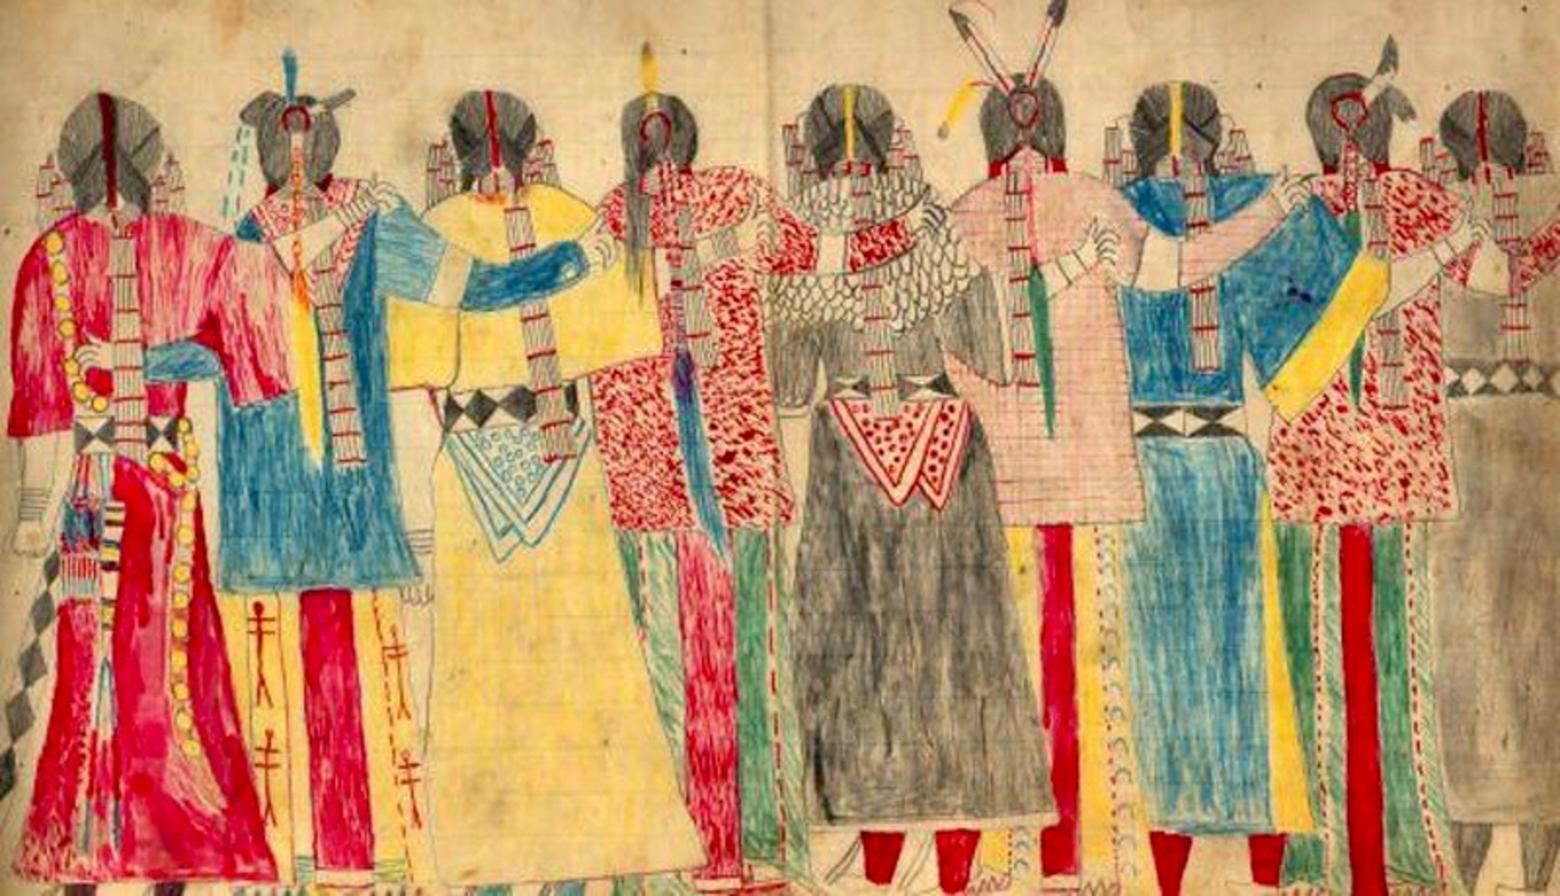 Untitled ledger drawing in graphite and colored pencil by Lakota artist and leader Black Hawk, born ca. 1832.  Piece was featured in a 2016 exhibition of ledger art staged by plainsledgerart.org 